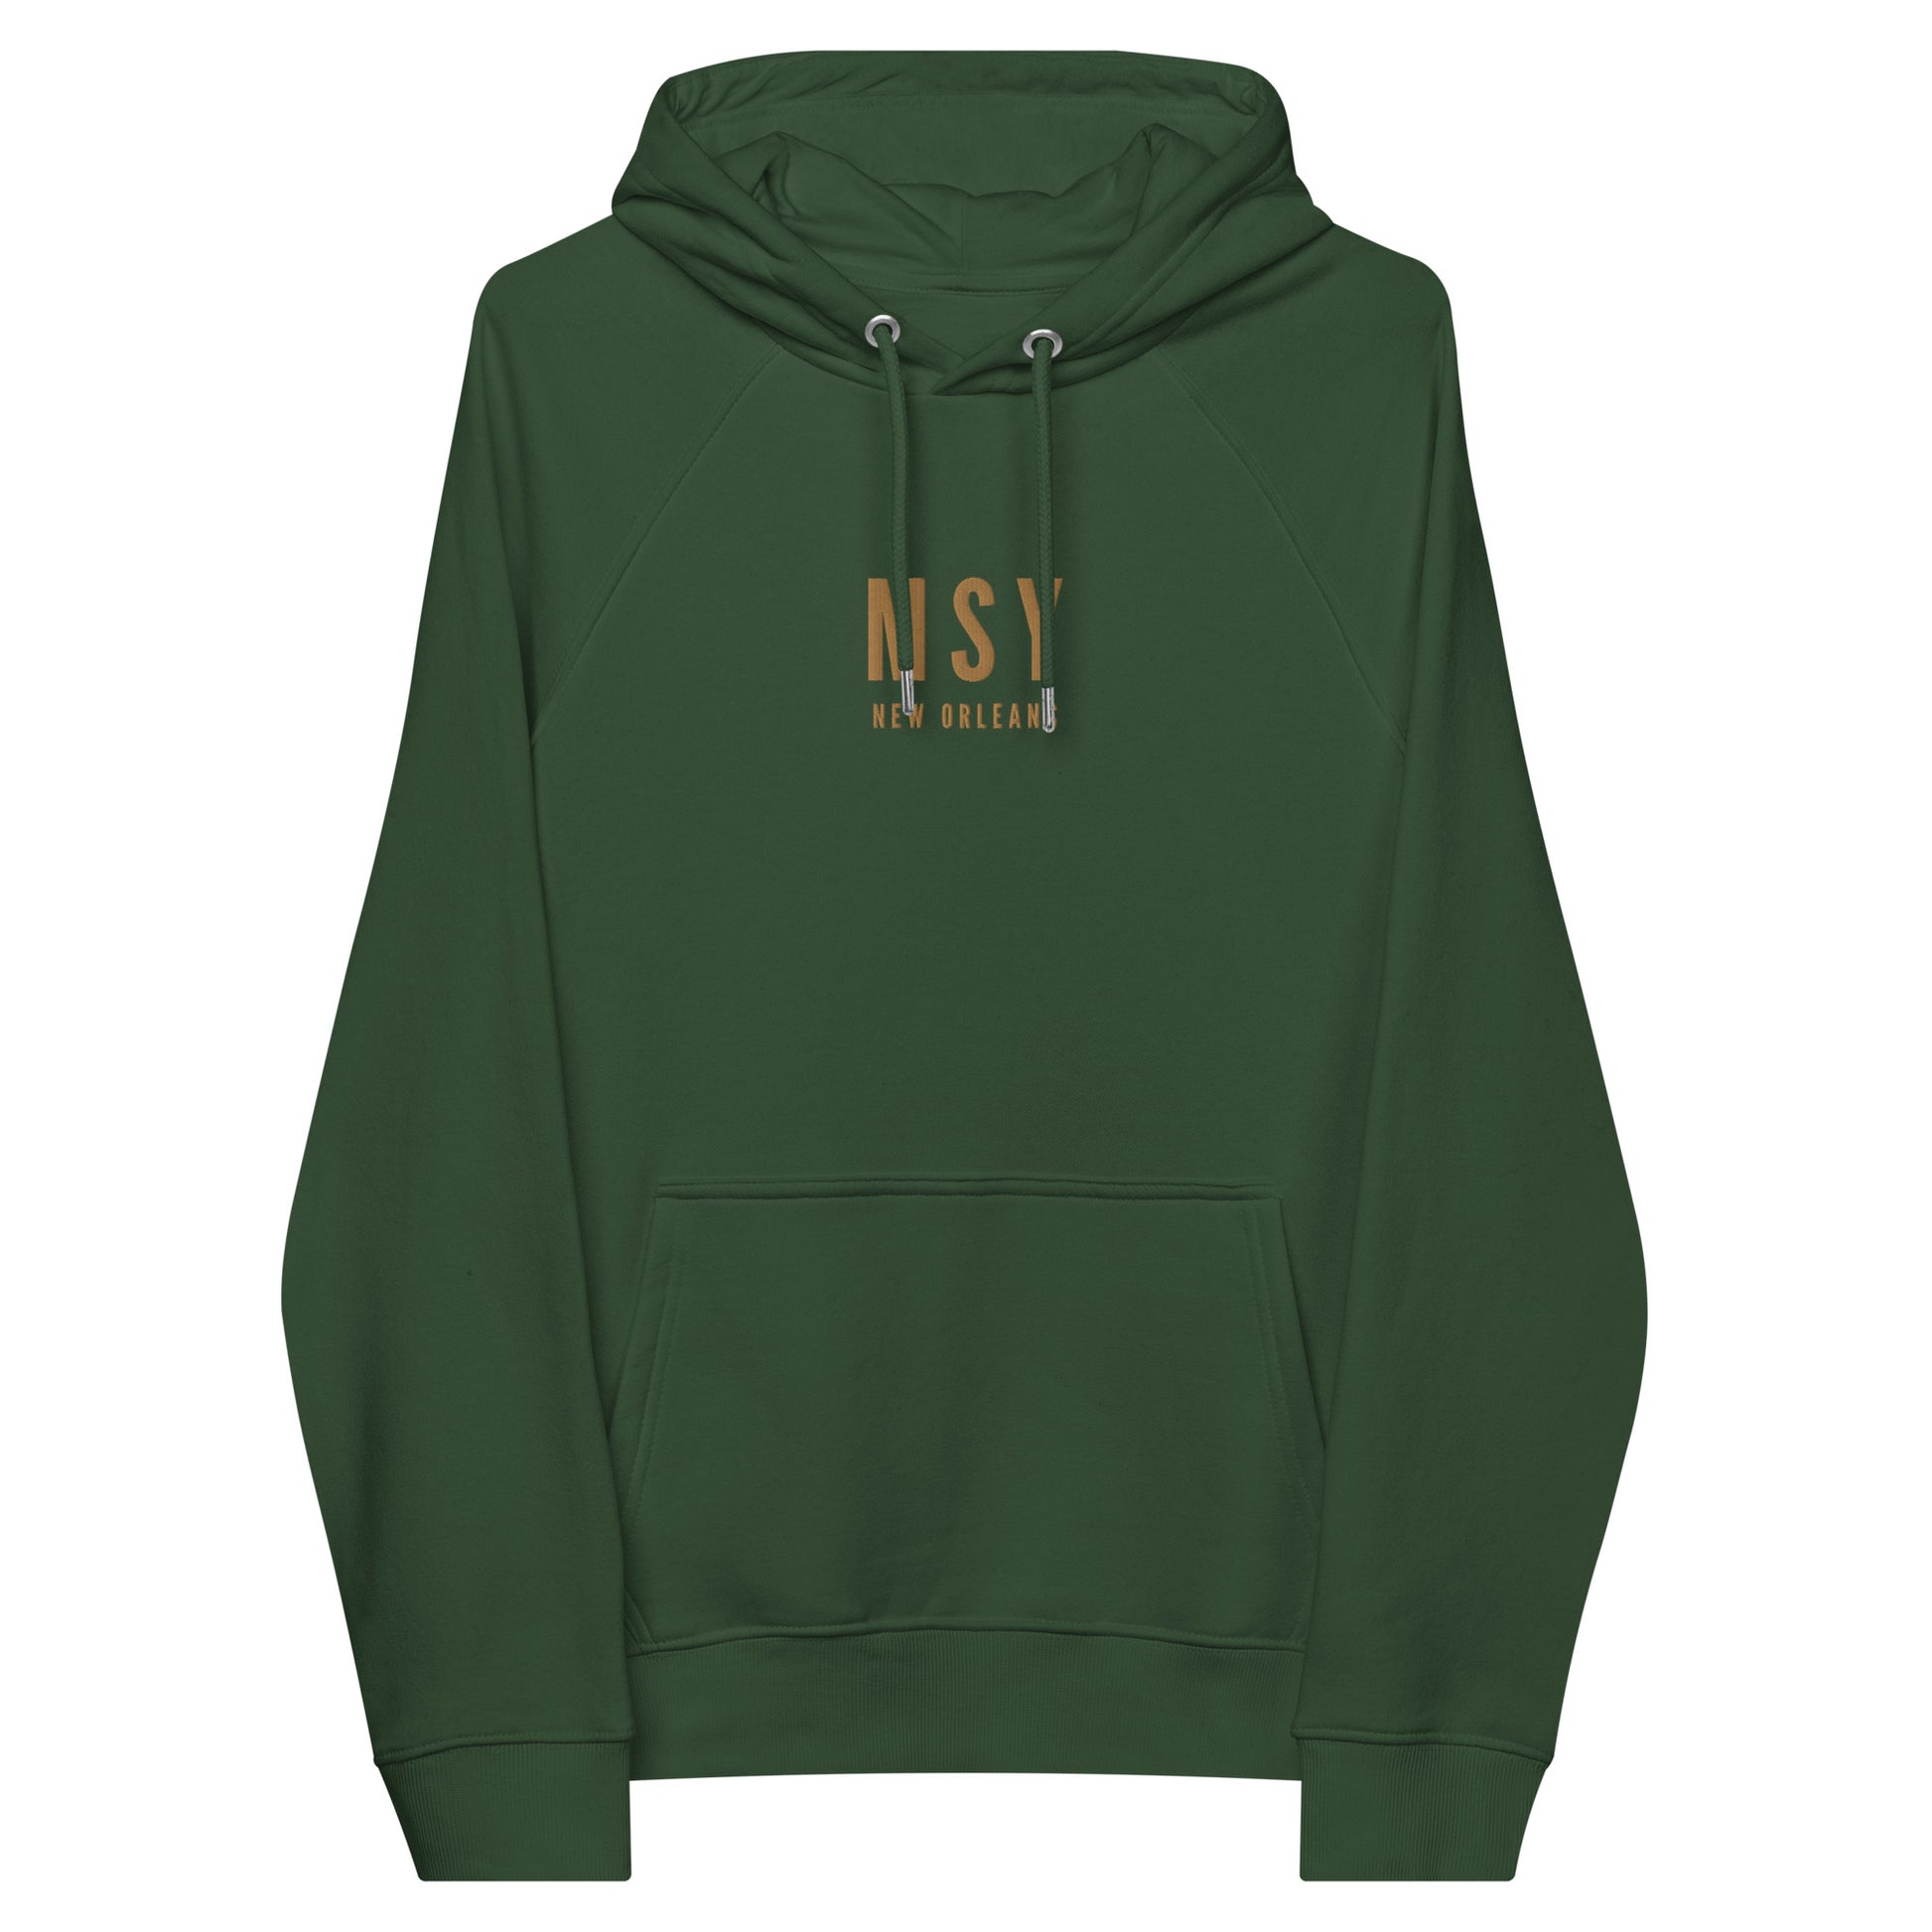 City Organic Hoodie - Old Gold • MSY New Orleans • YHM Designs - Image 08